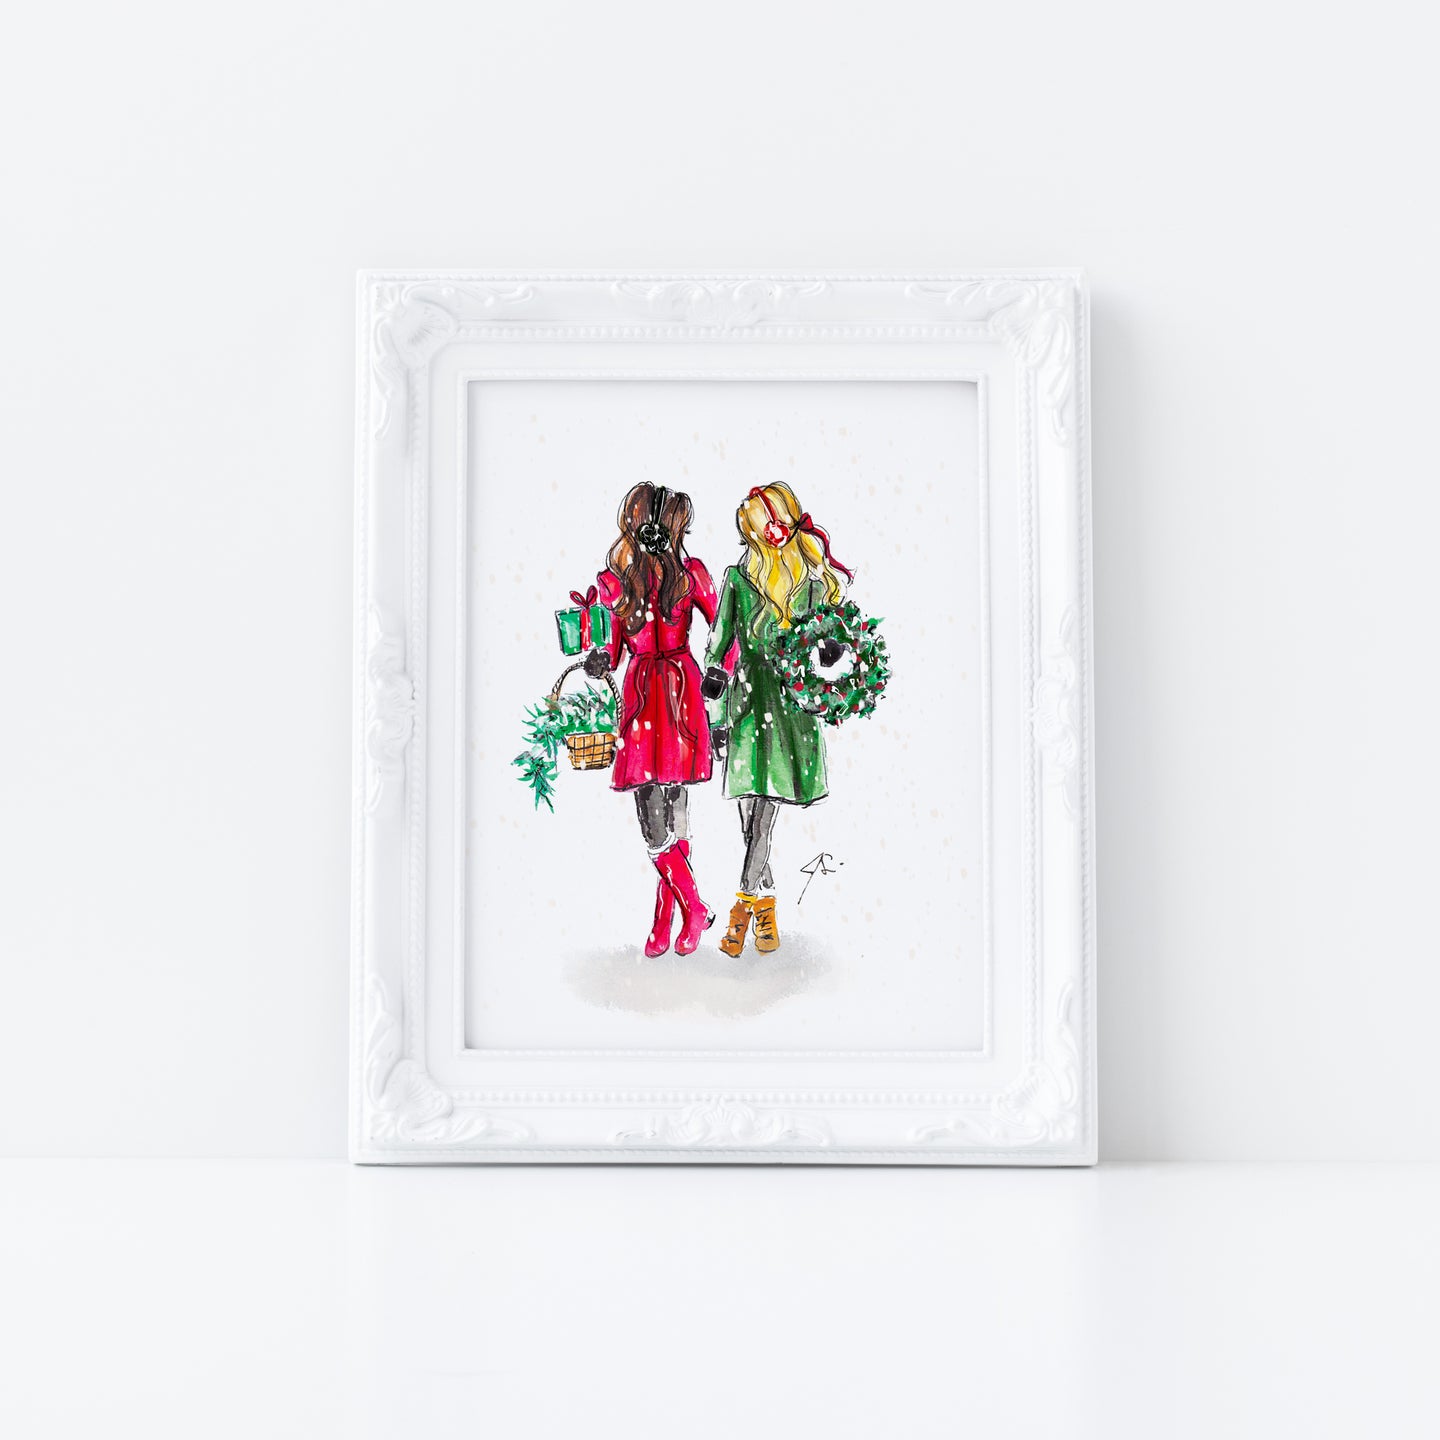 Merry and Bright Art Print